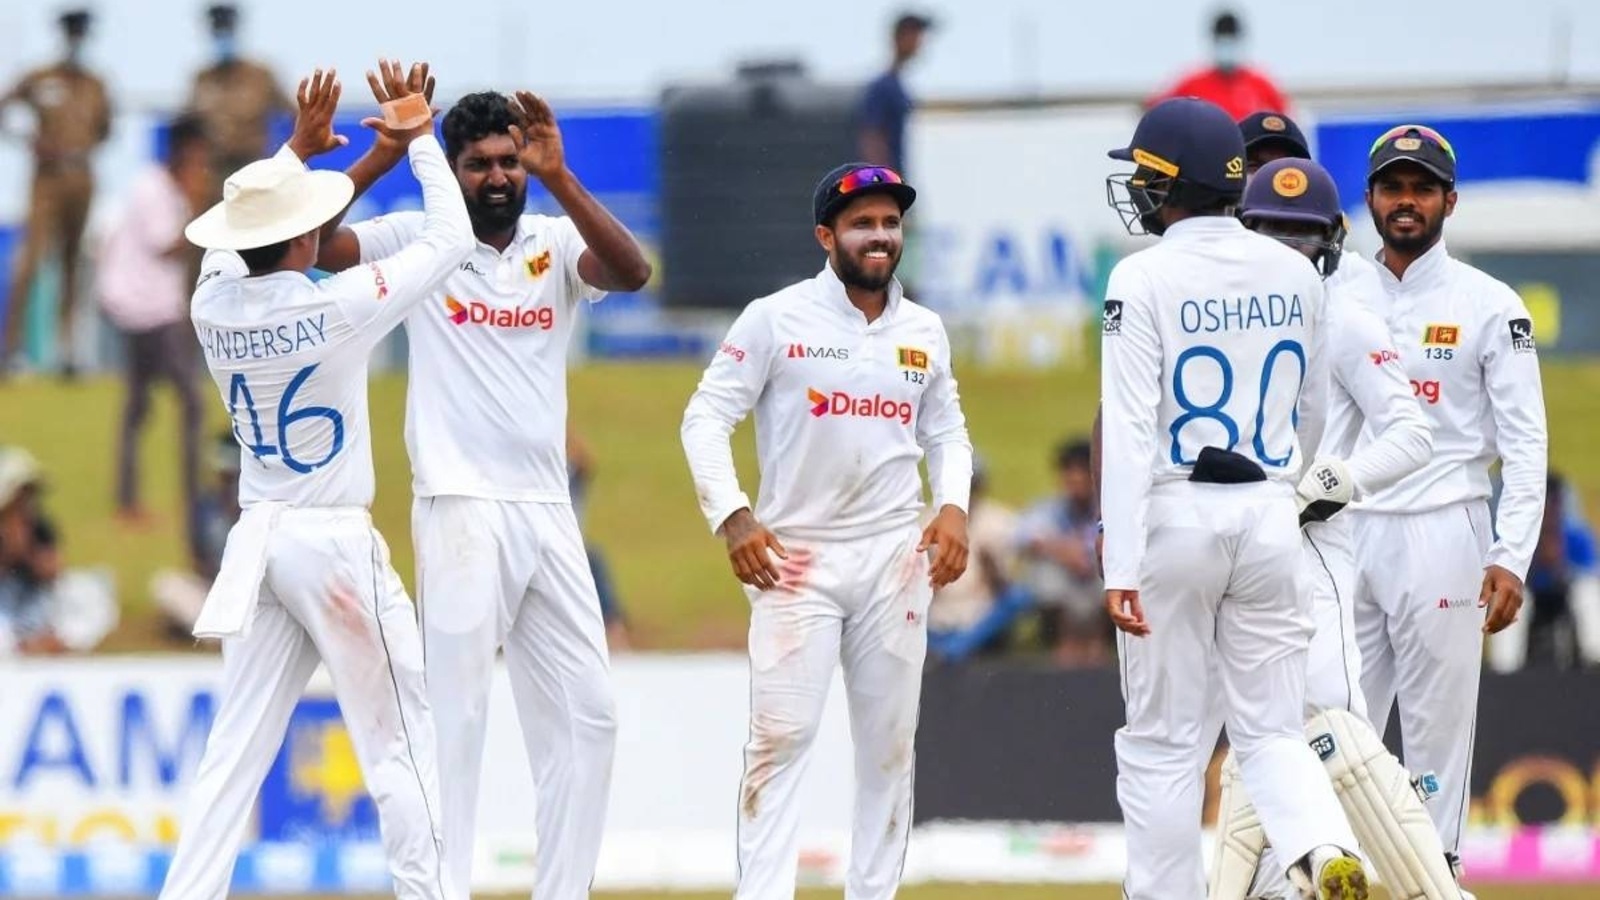 Sri Lanka asks ICC to investigate match-fixing allegations in Pakistan series Cricket